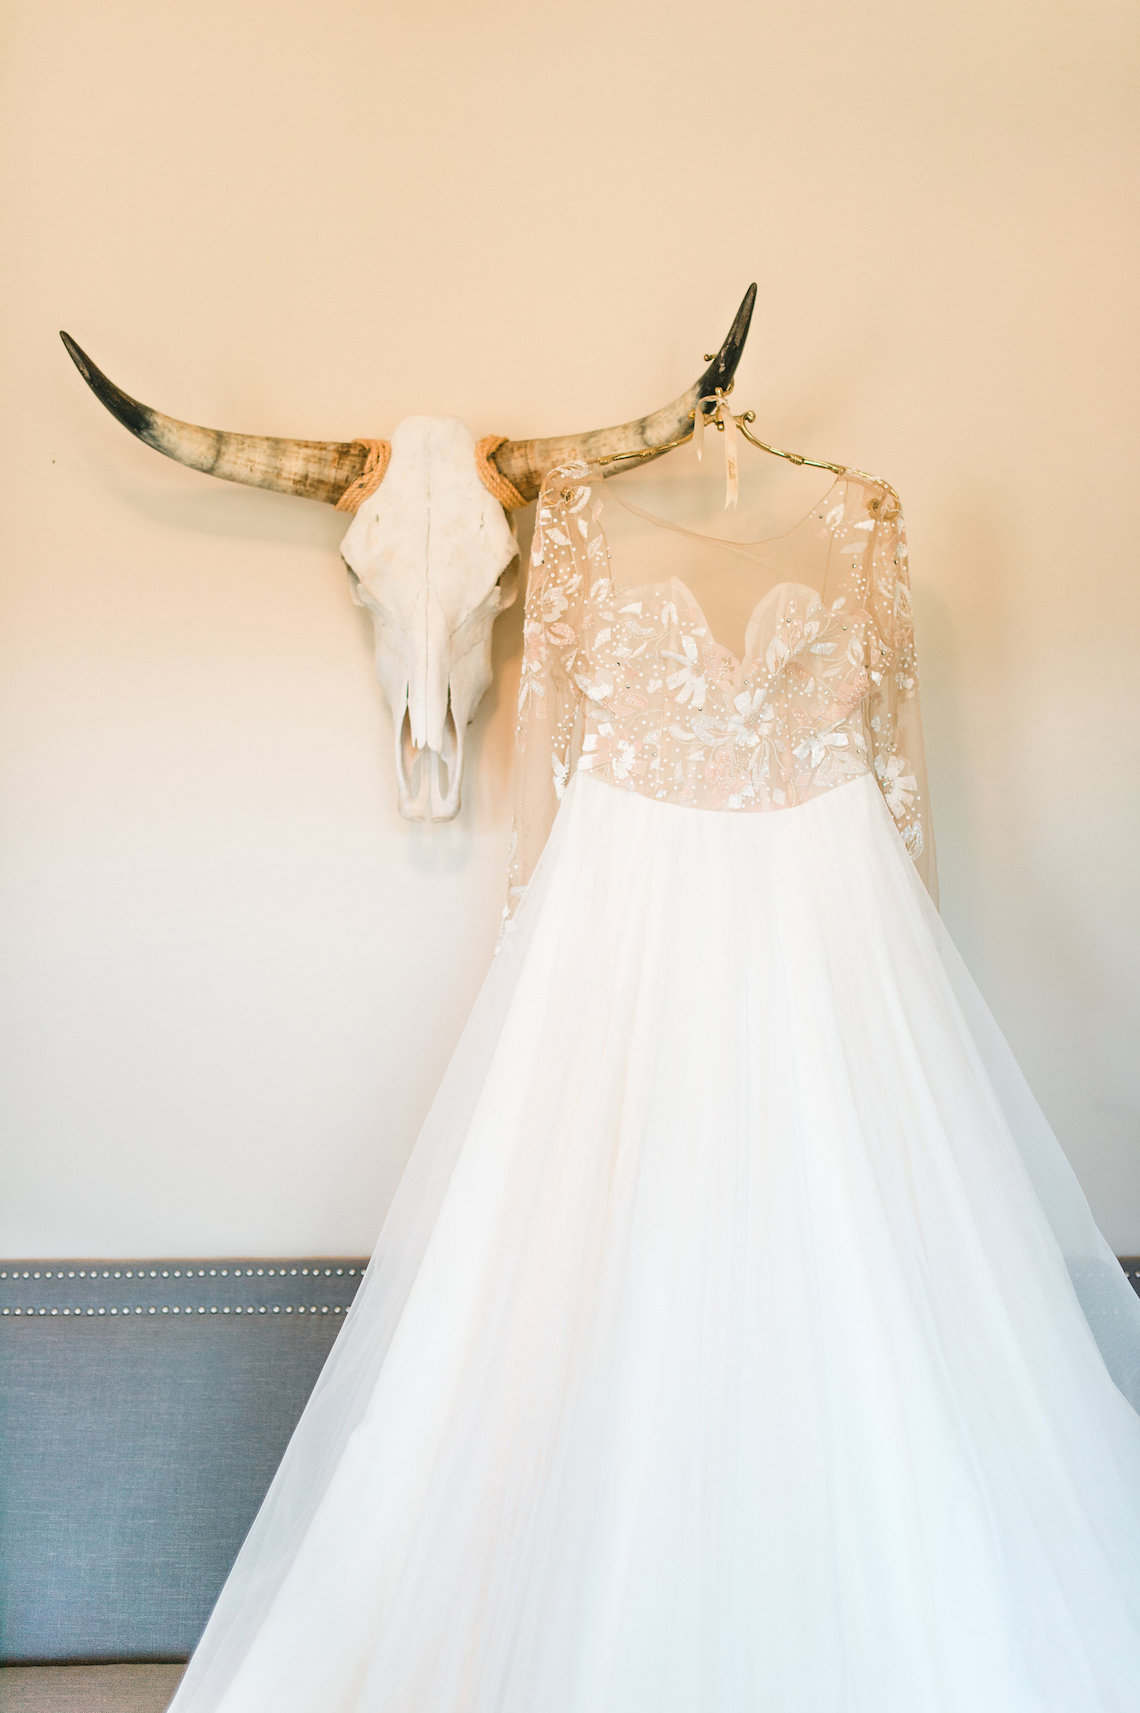 Whimsical Barn Wedding Inspiration by Glorious Moments Photography and Sara Gillianne 1